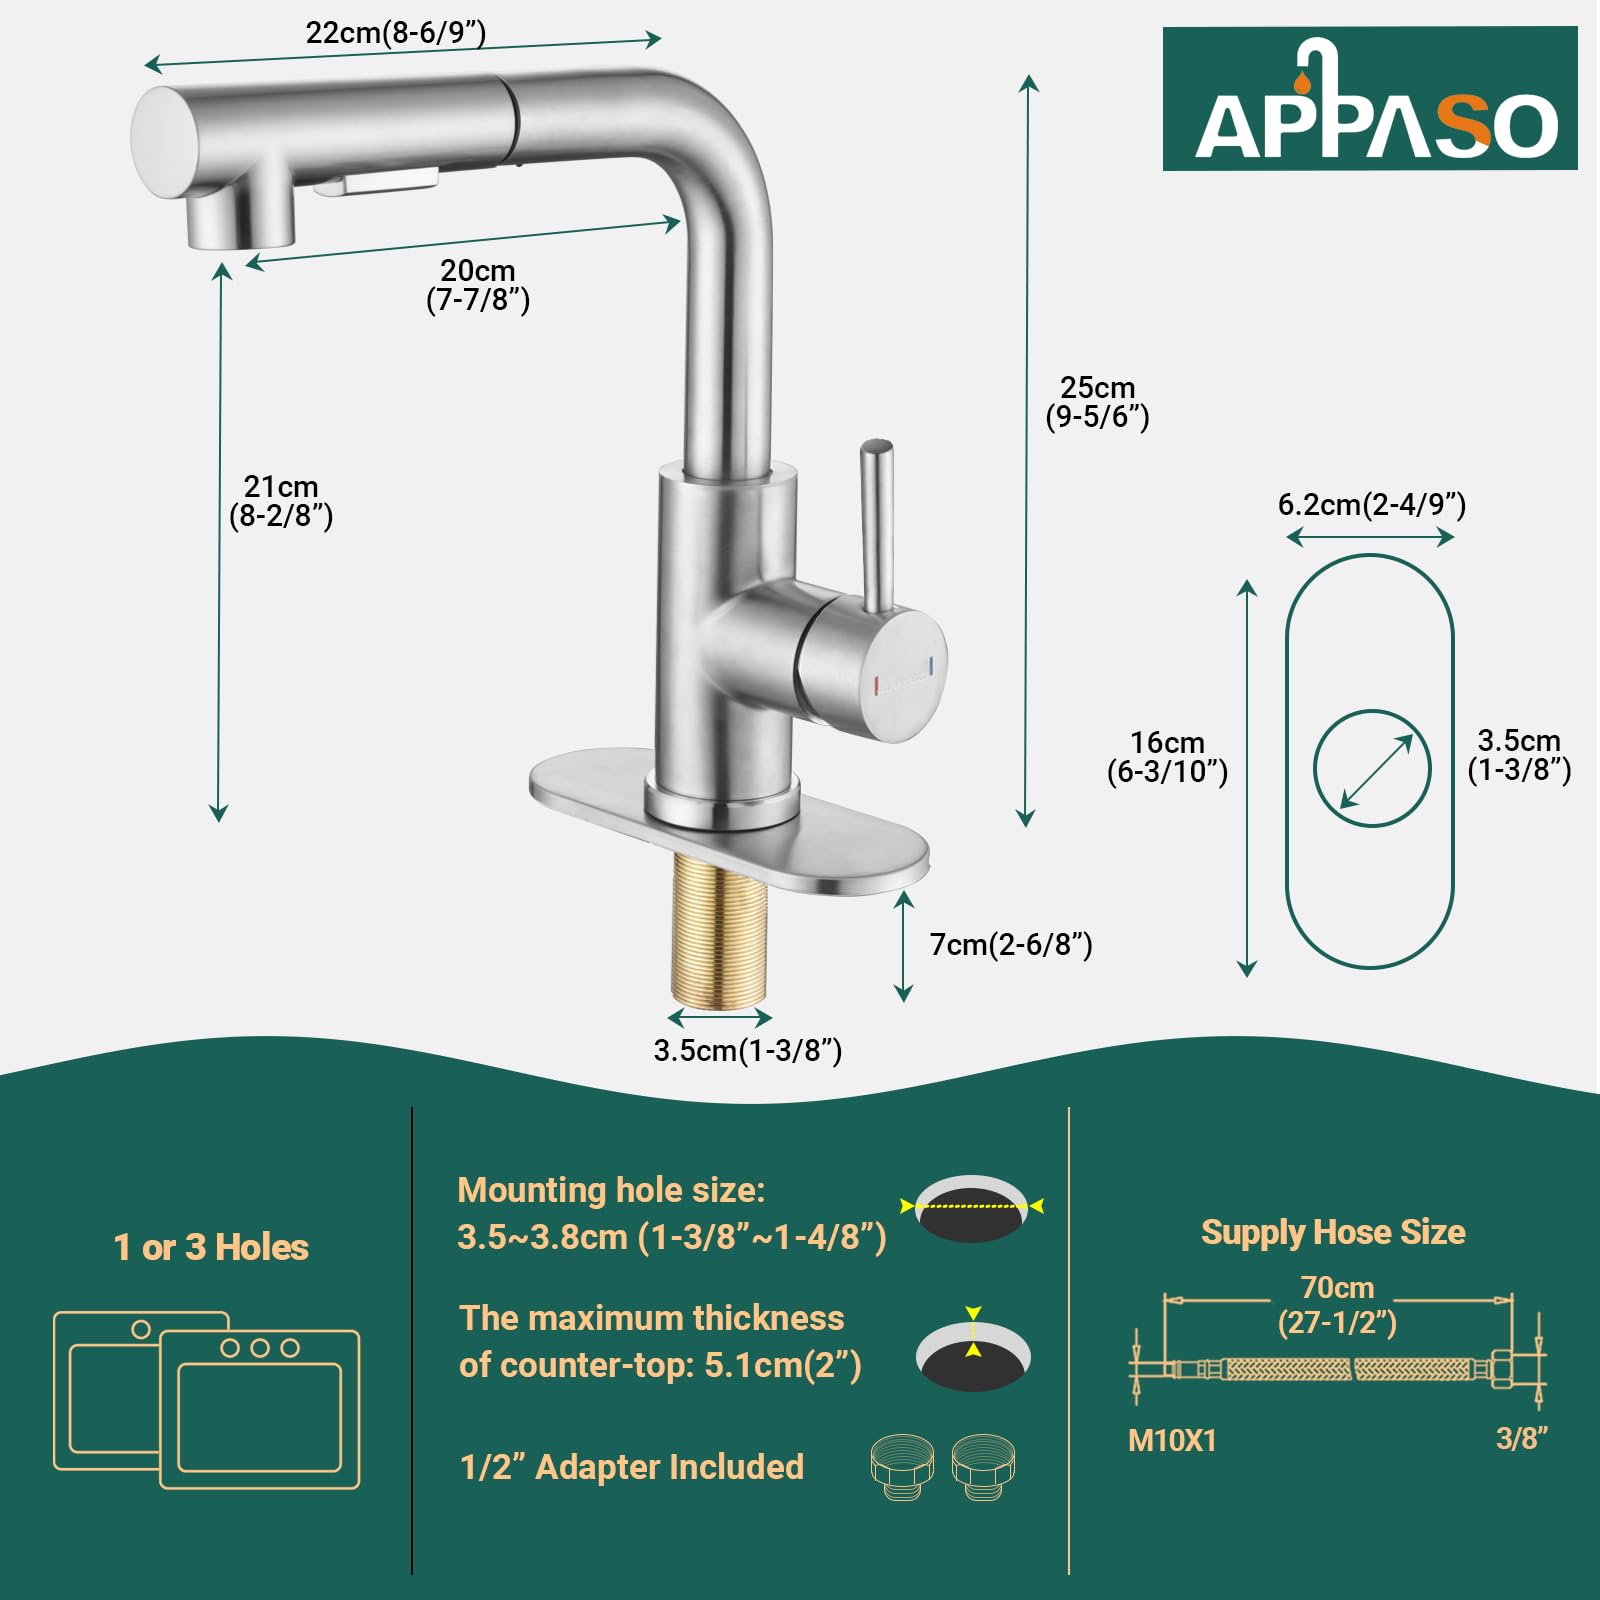 APPASO Bar Sink Faucet 8 INCH, Brushed Nickel Kitchen Faucet with Pull-Out Sprayer Stainless Steel, Modern Single Handle Bathroom Utility Faucet, Pull Down Small Faucet for RV Camper Outdoor Restroom